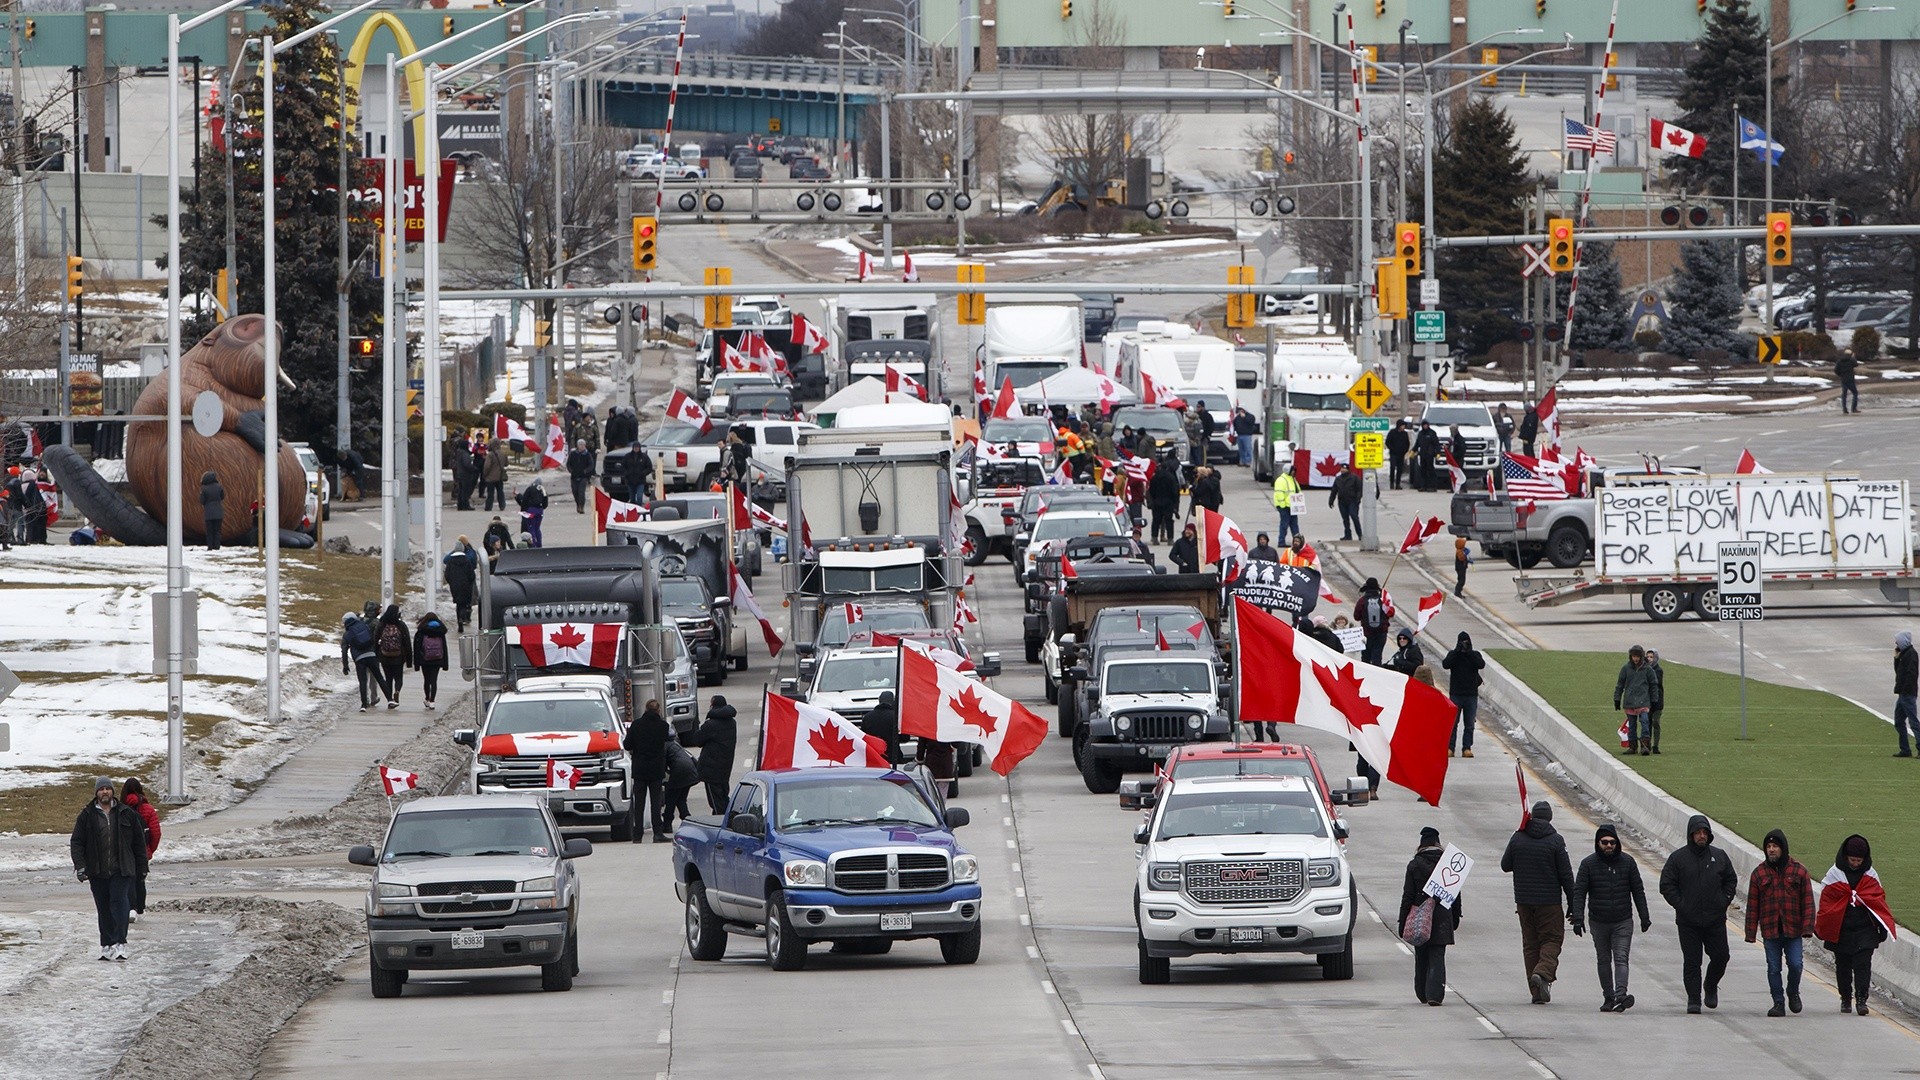 Canada's trucker protests: What is going on?